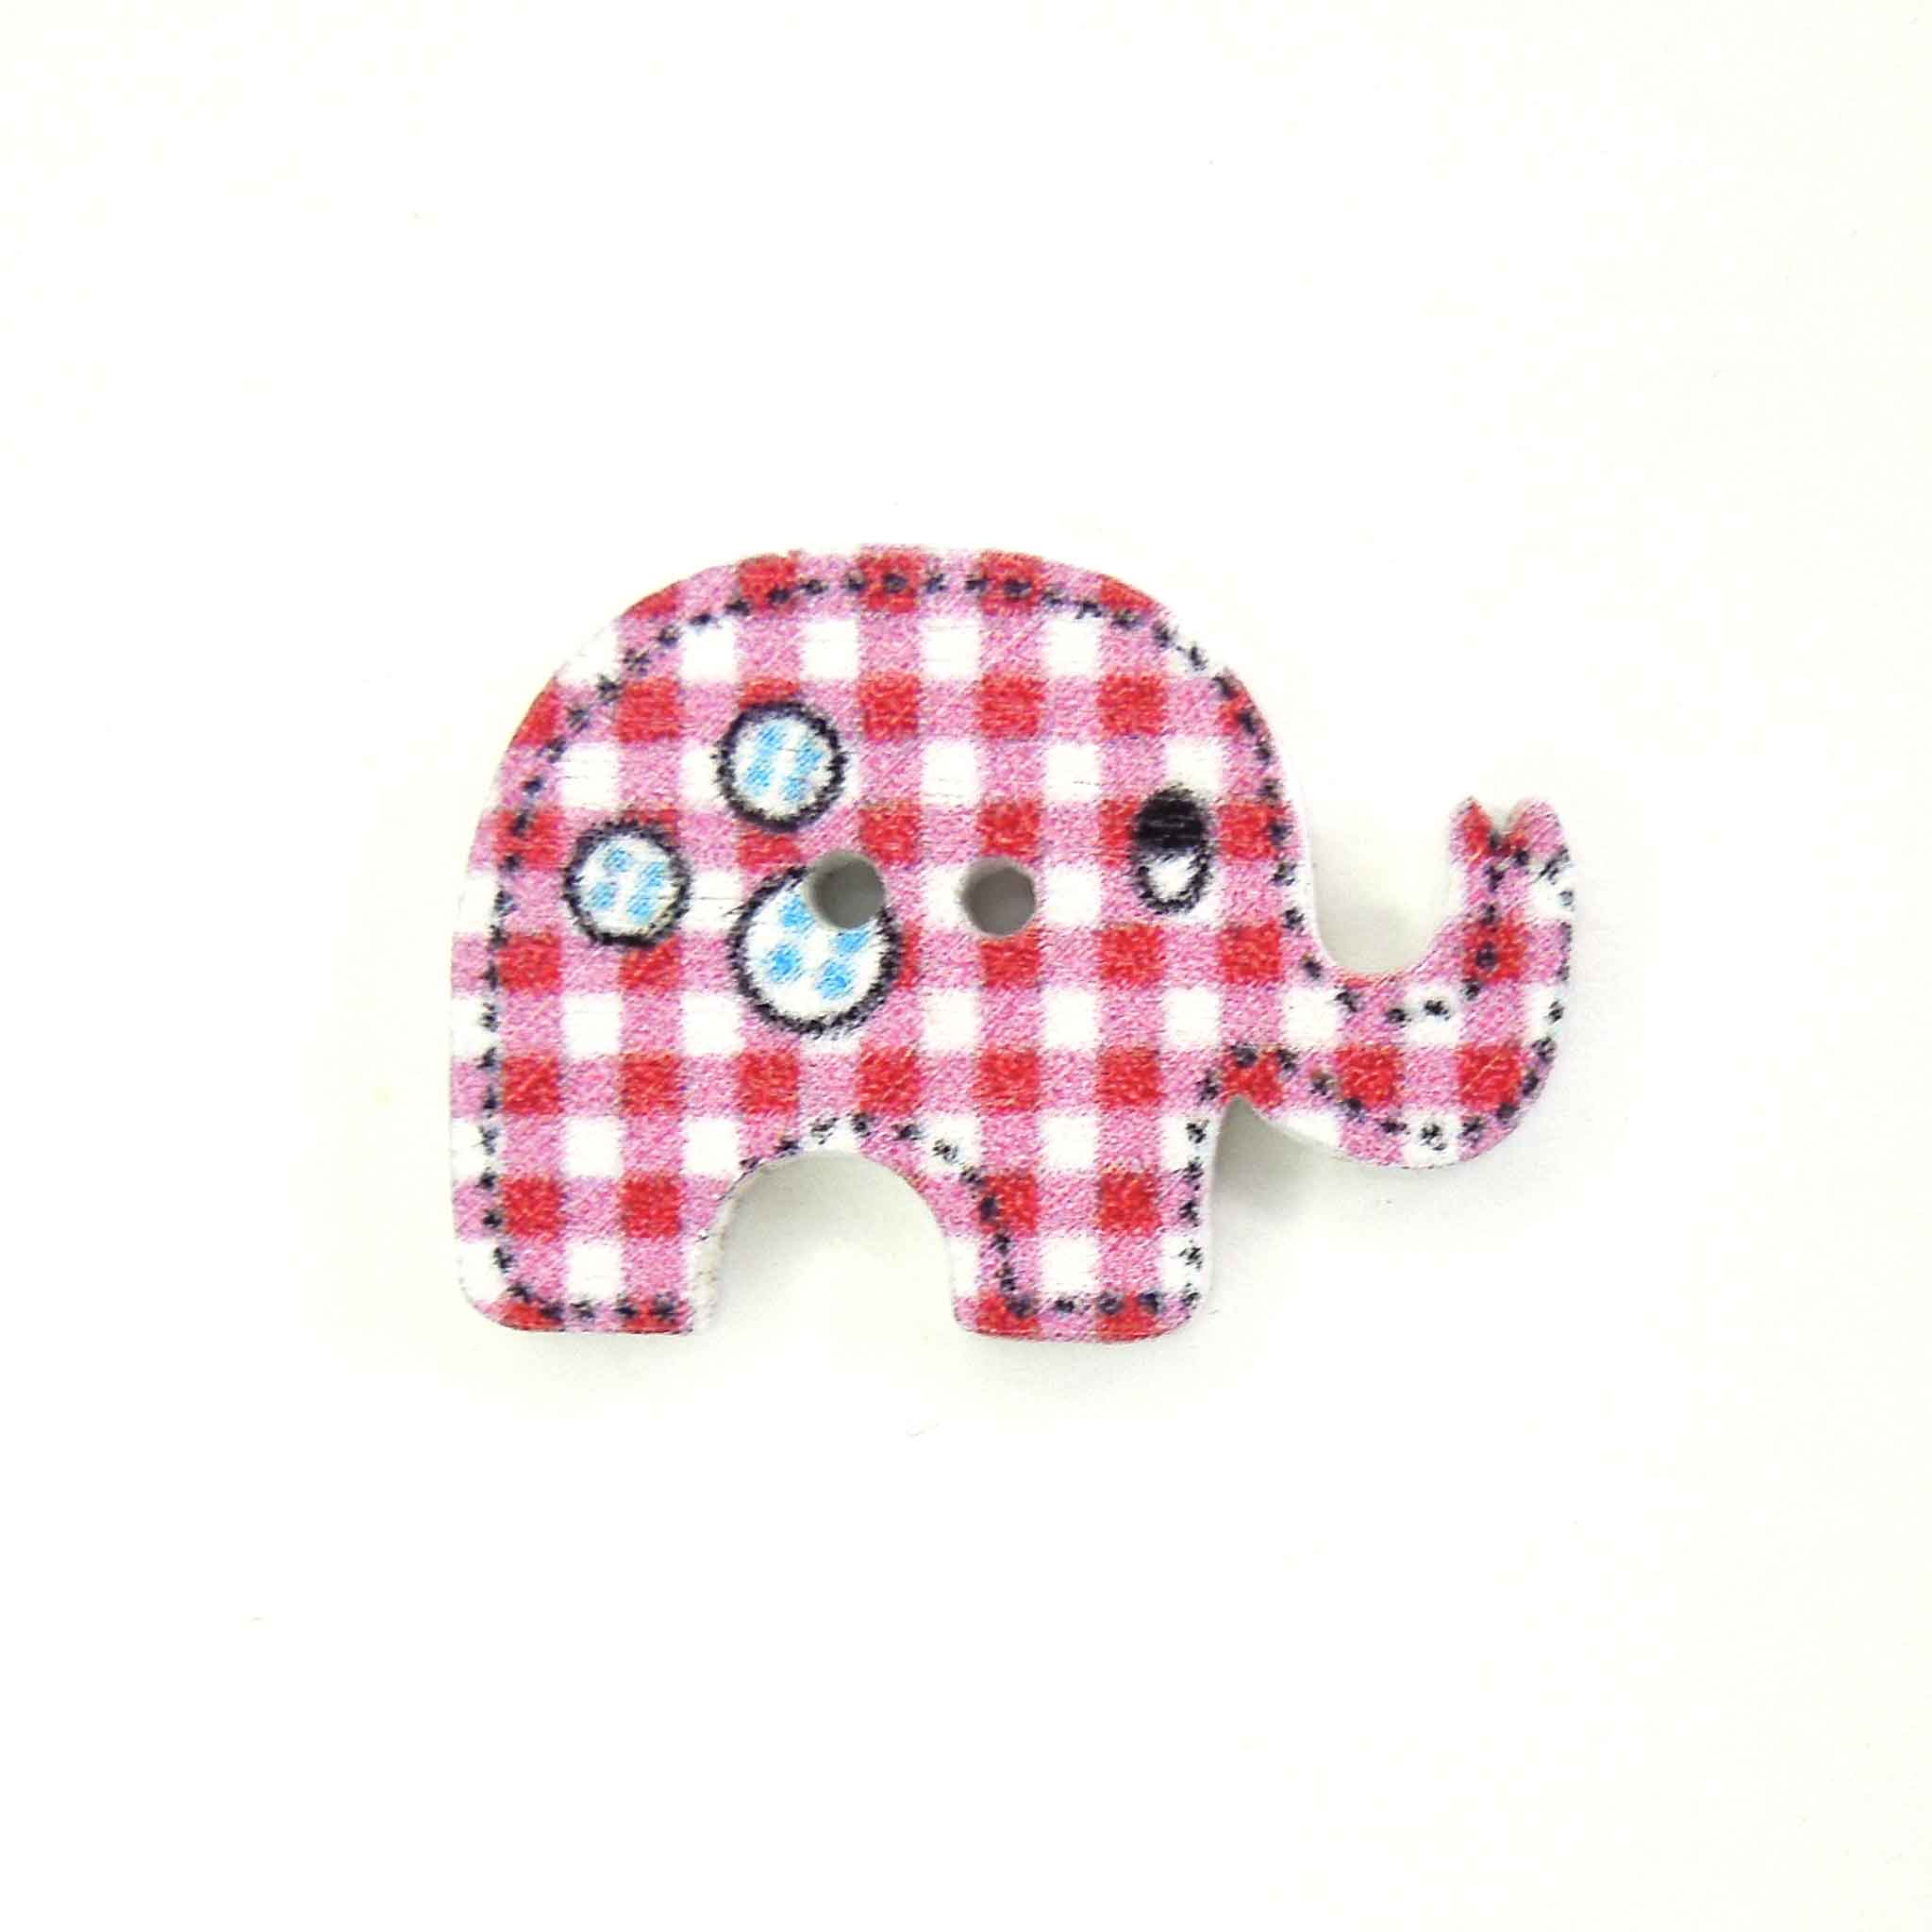 Kid's Pink Elephant Wood Buttons, 2 Holes, Pack of 6 Buttons